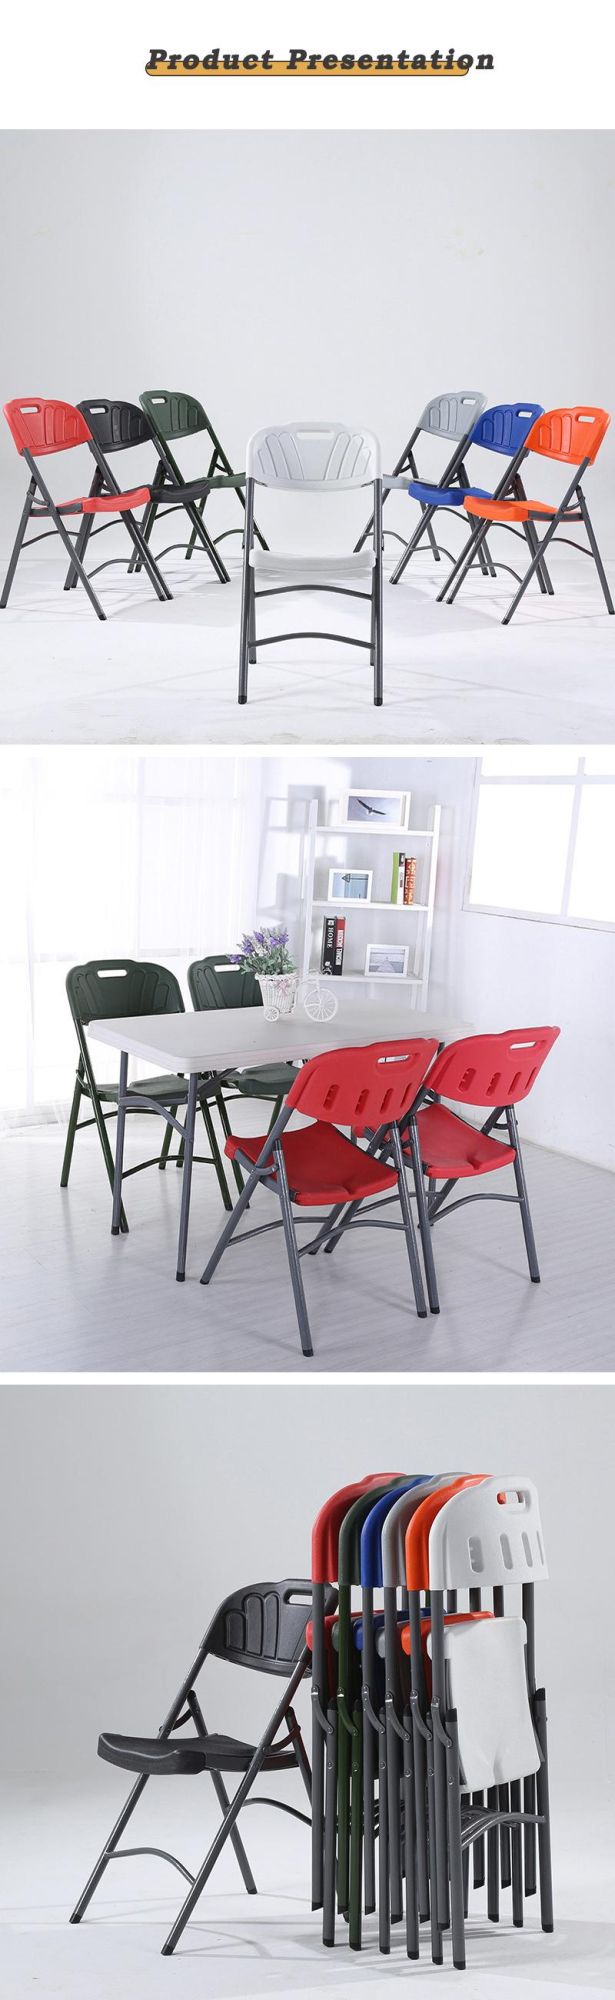 Garden Outdoor Plastic Folding White Chair /Restaurant Hotel Furniture Banquet Chairs for Camping